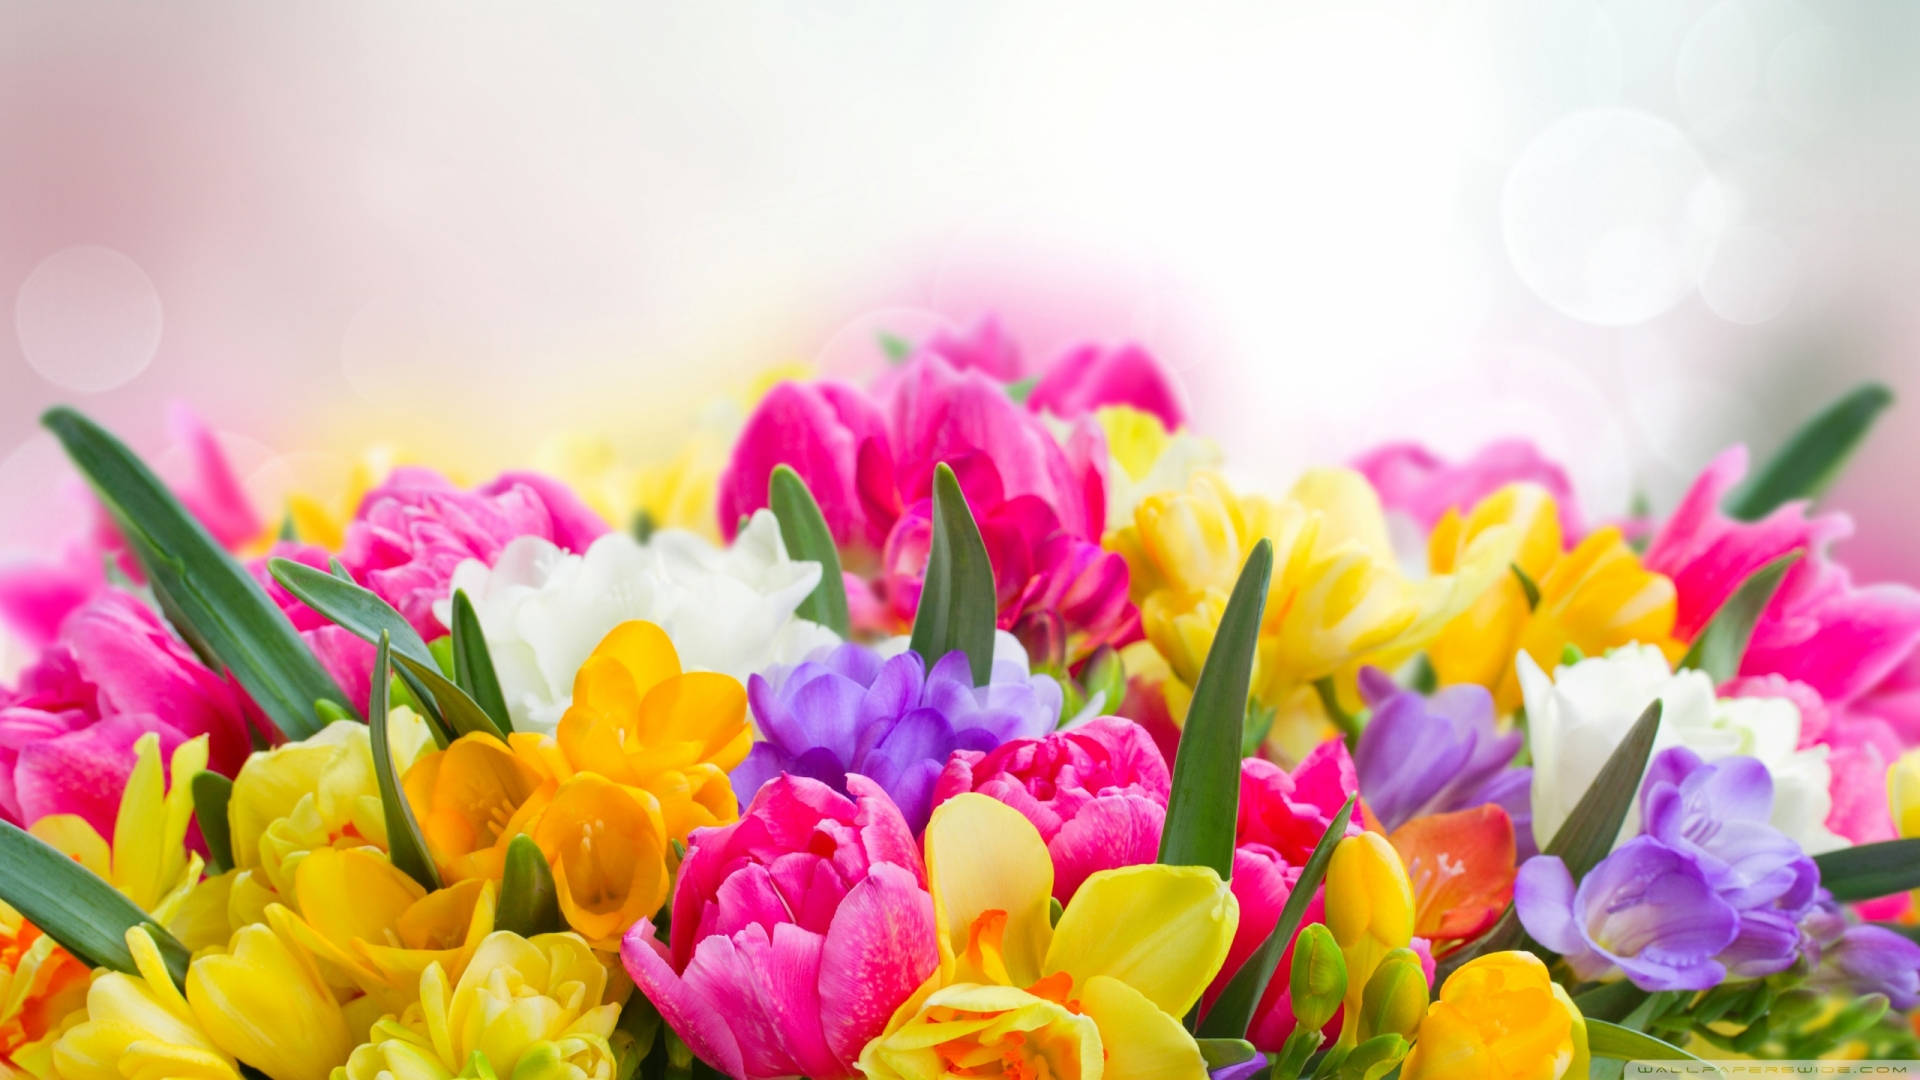 Colorful Spring Flowers Focus Photography